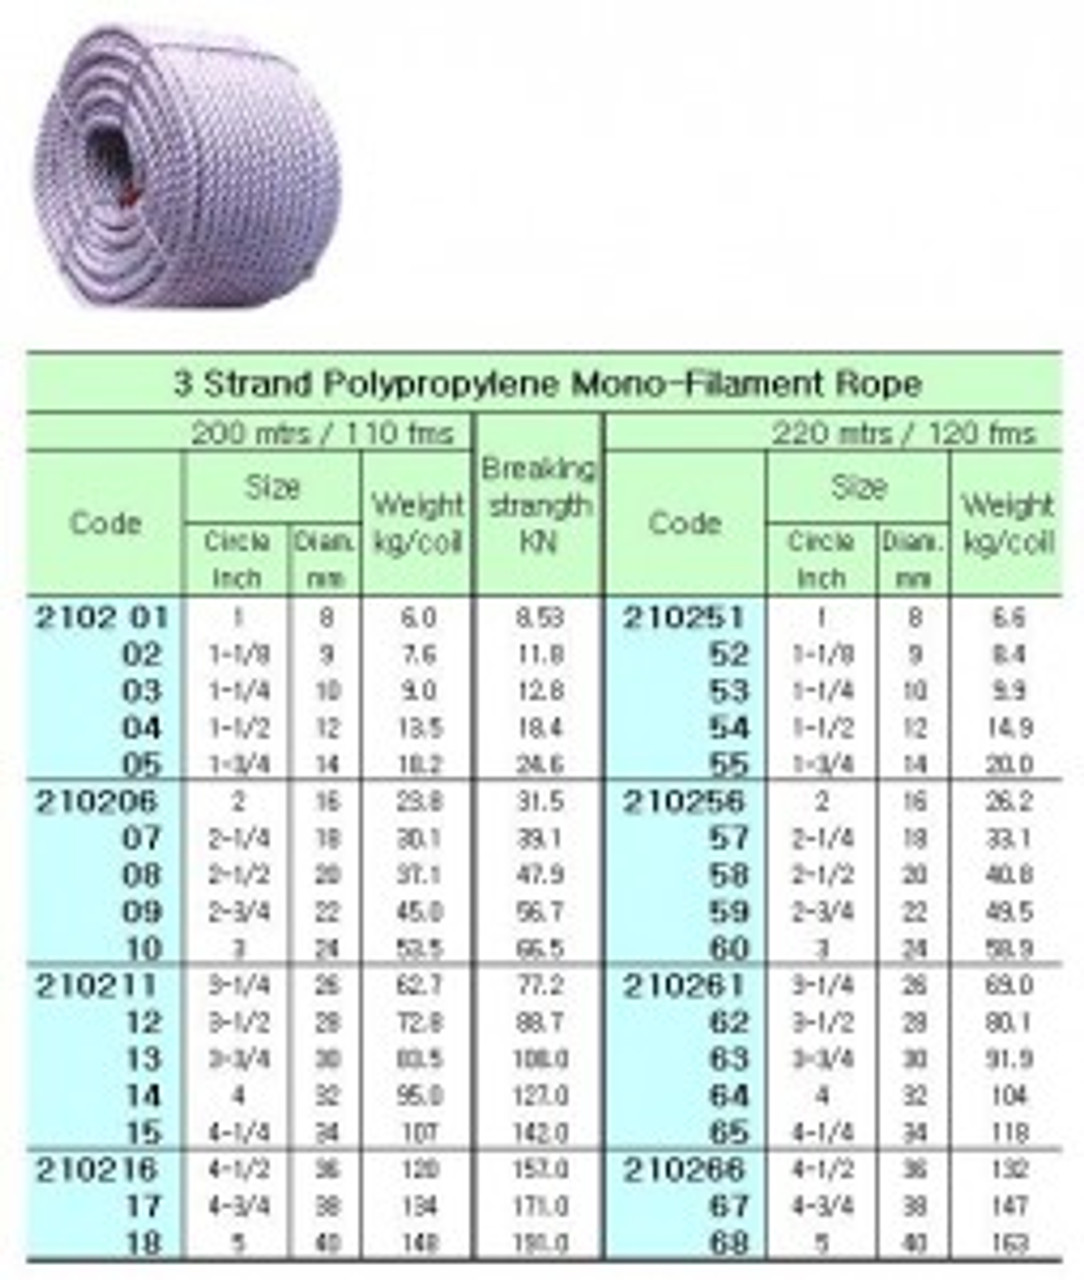 IMPA 210255 POLYPROPYLENE ROPE 14mm 3-strand coil of 220 mtr.